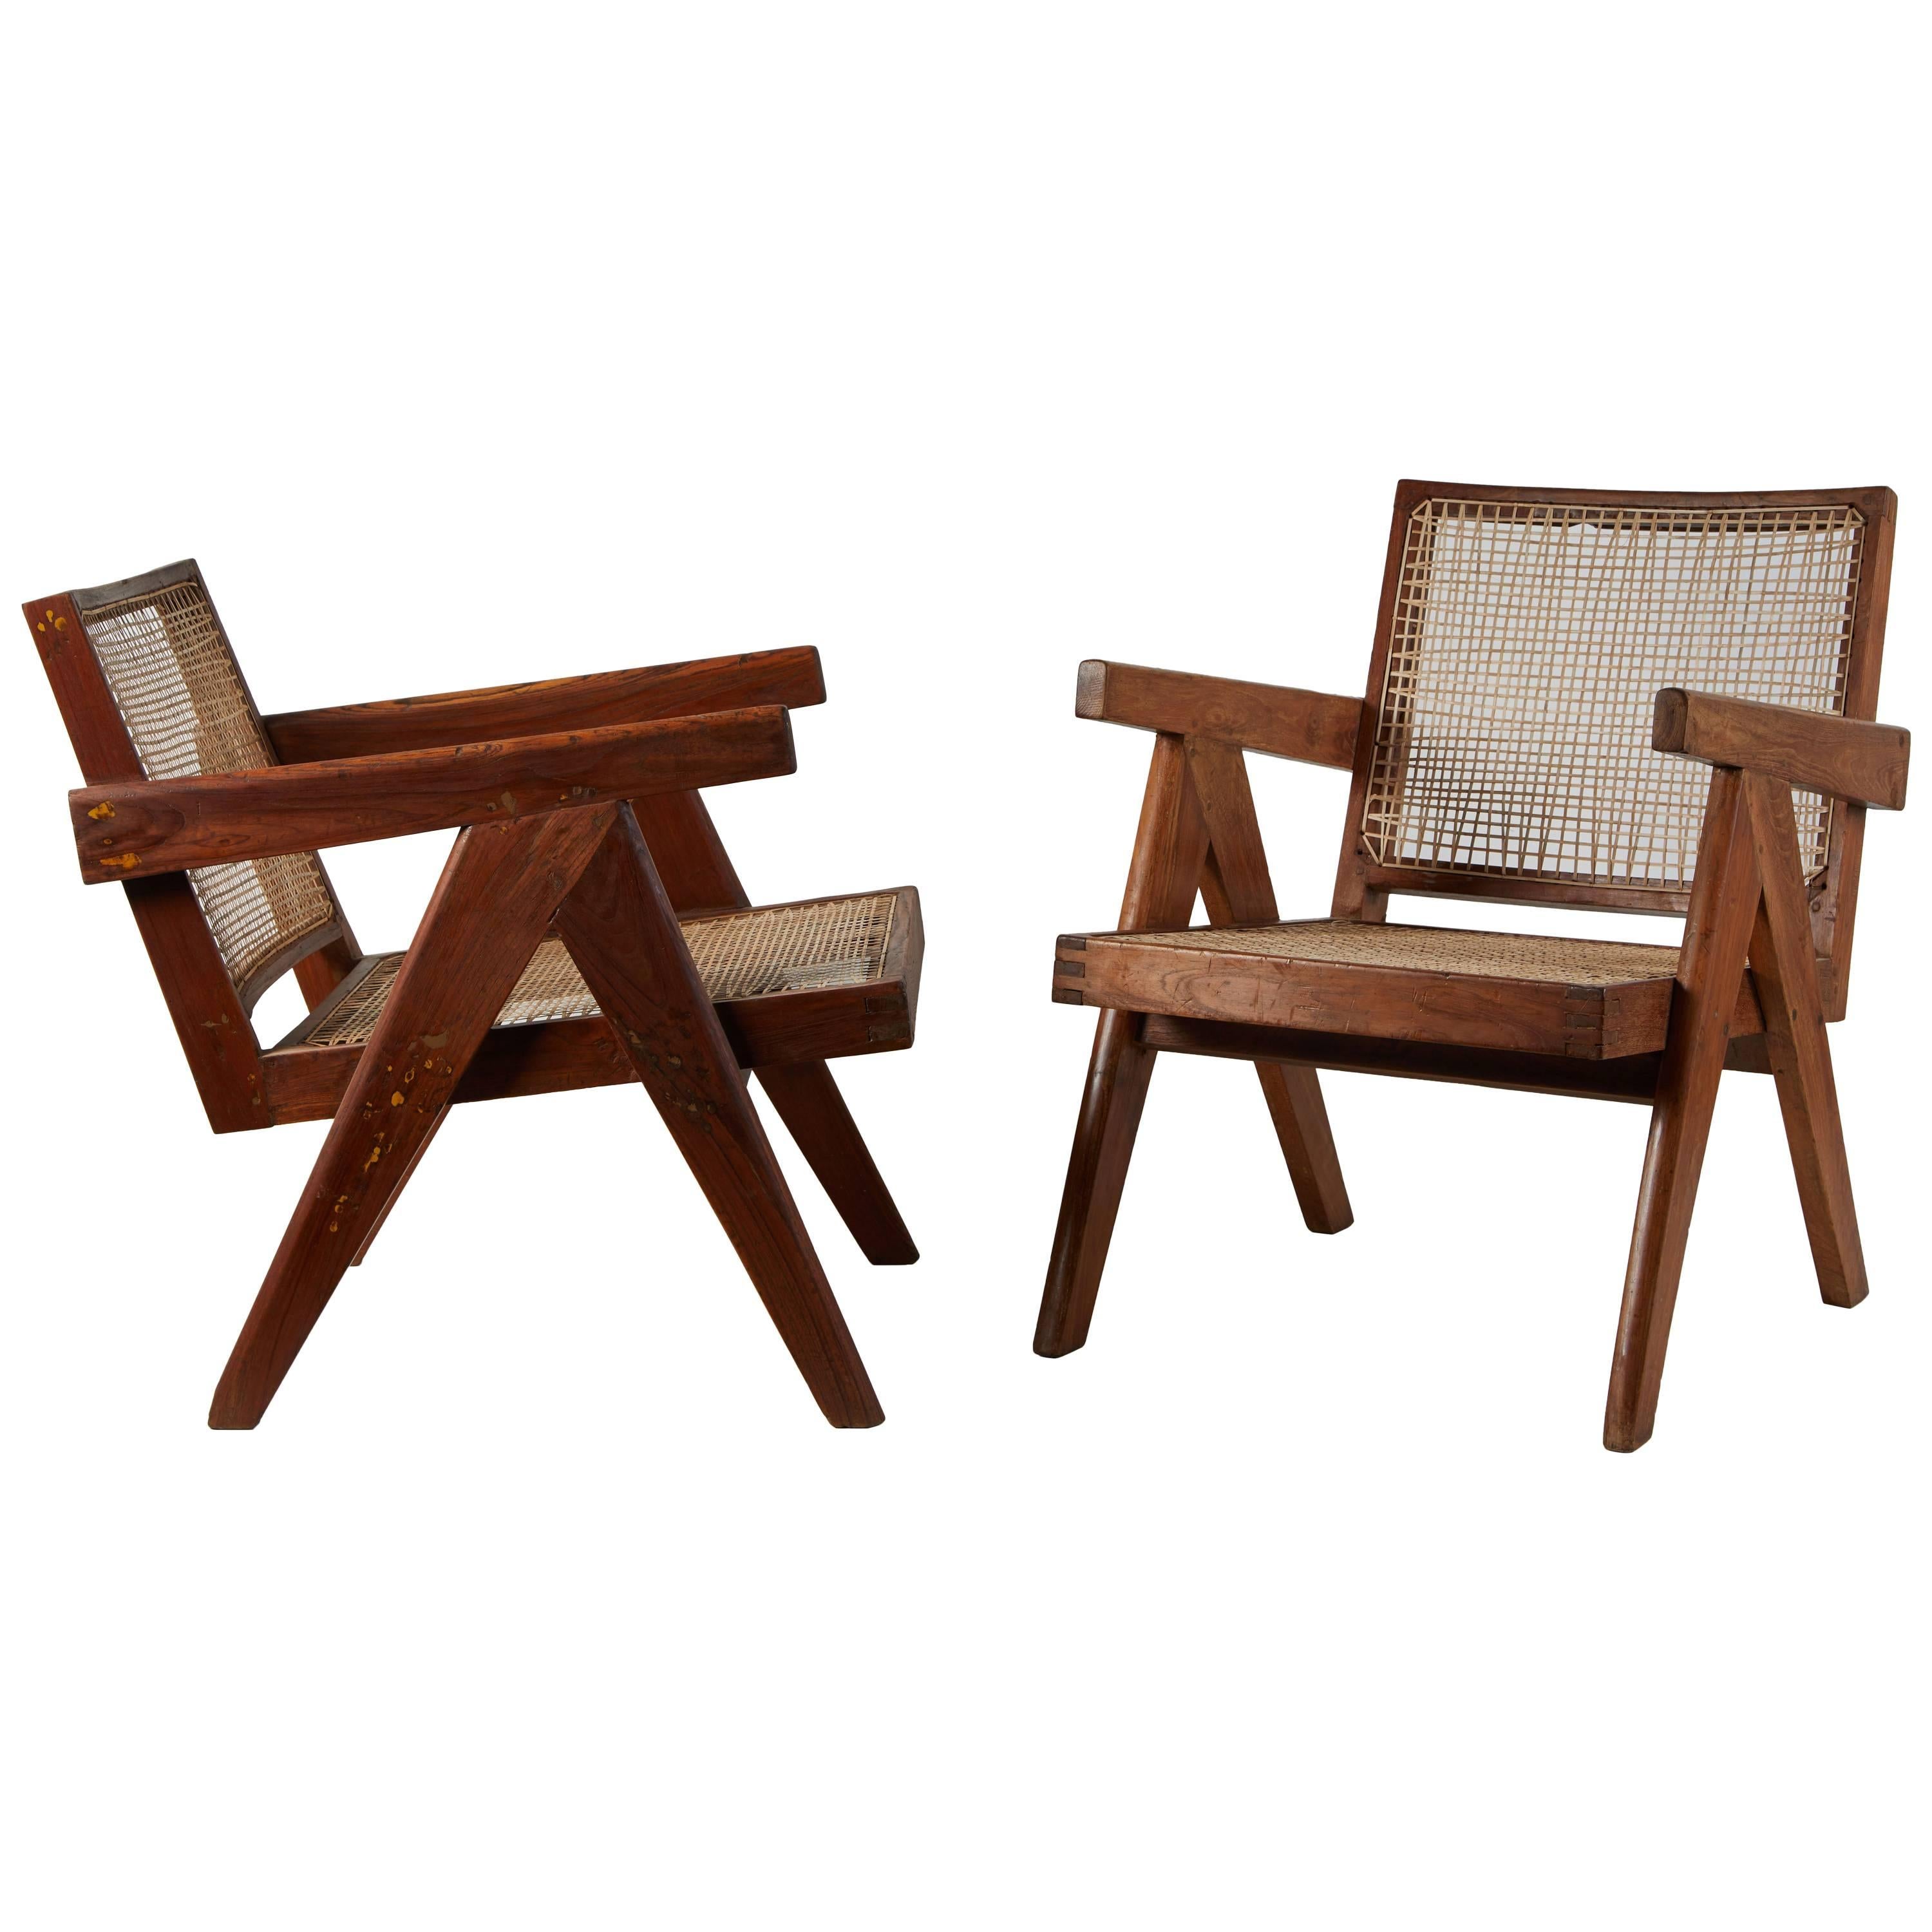 Pair of Easy Armchairs by Pierre Jeanneret